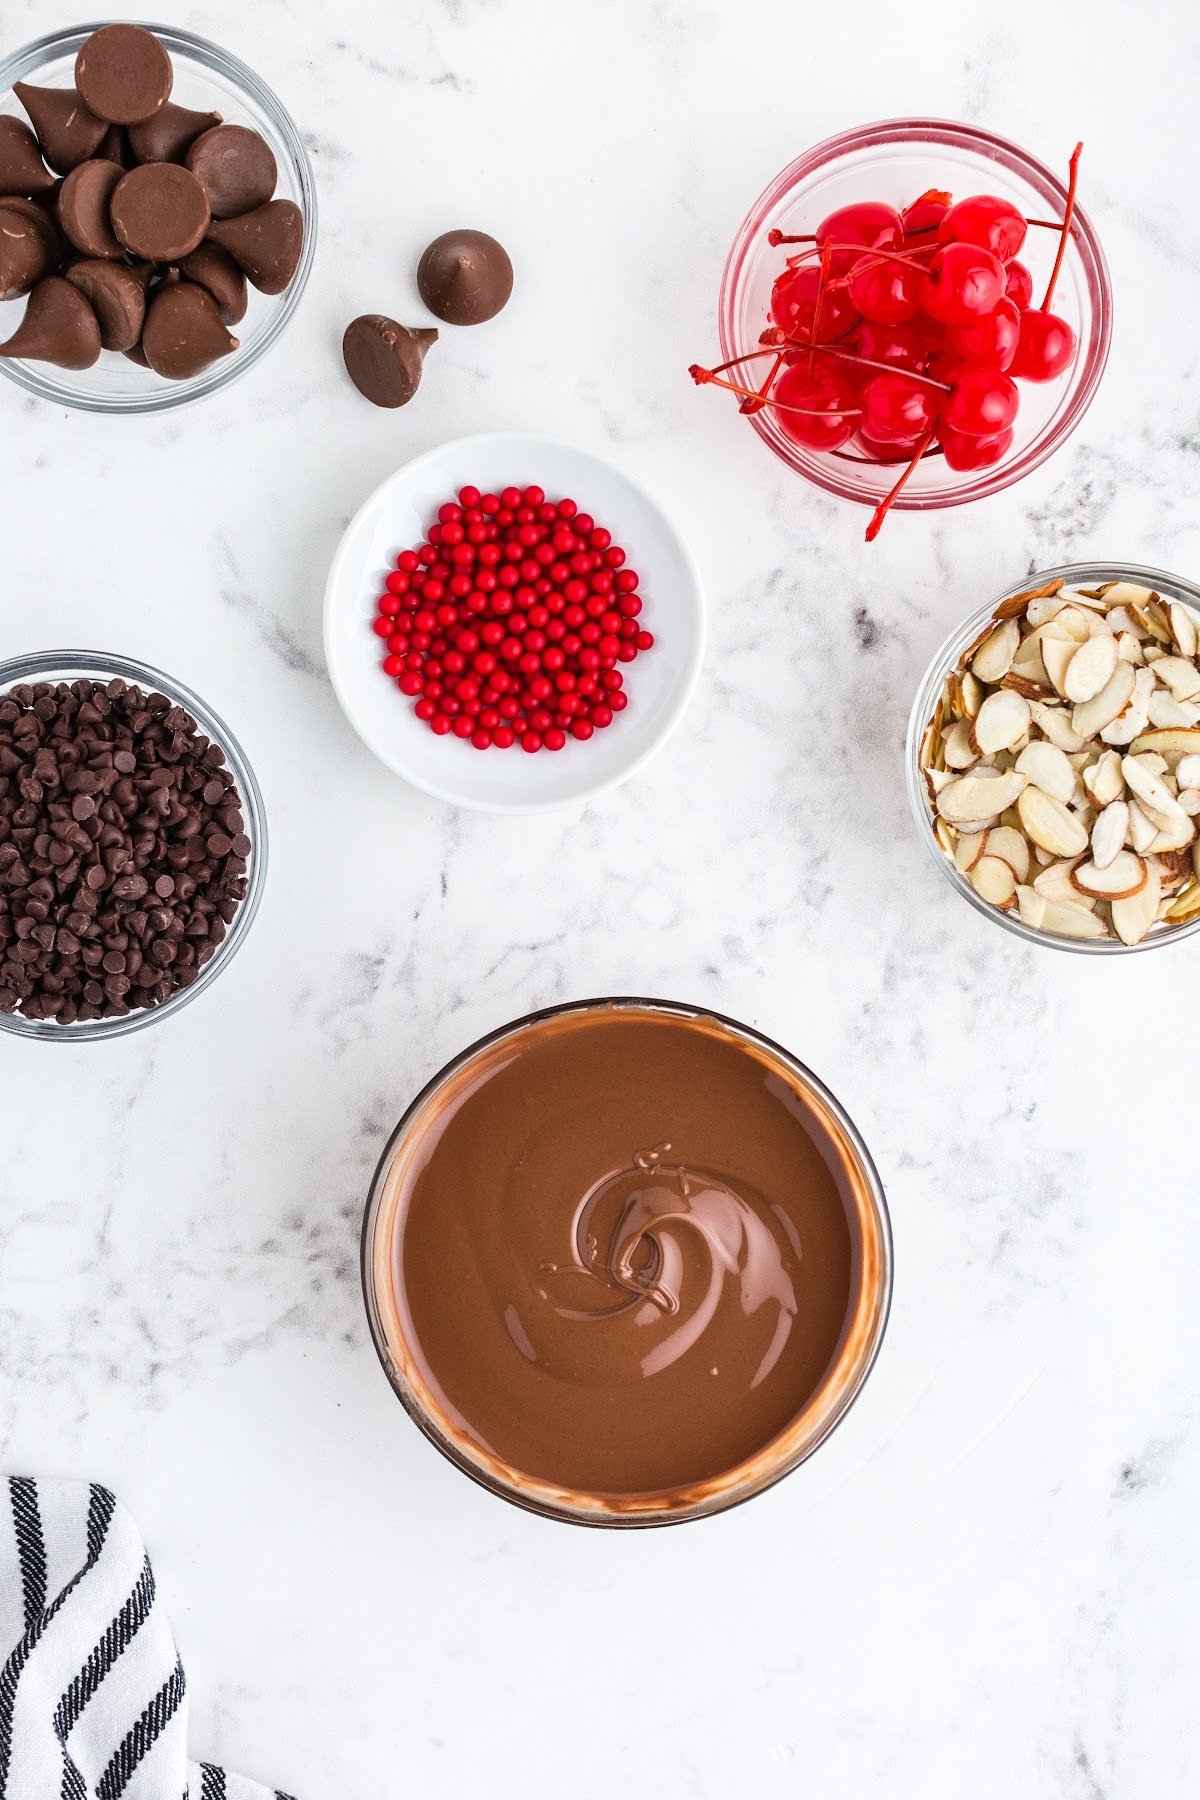 Melted milk chocolate in a bowl, with other ingredients surrounding.